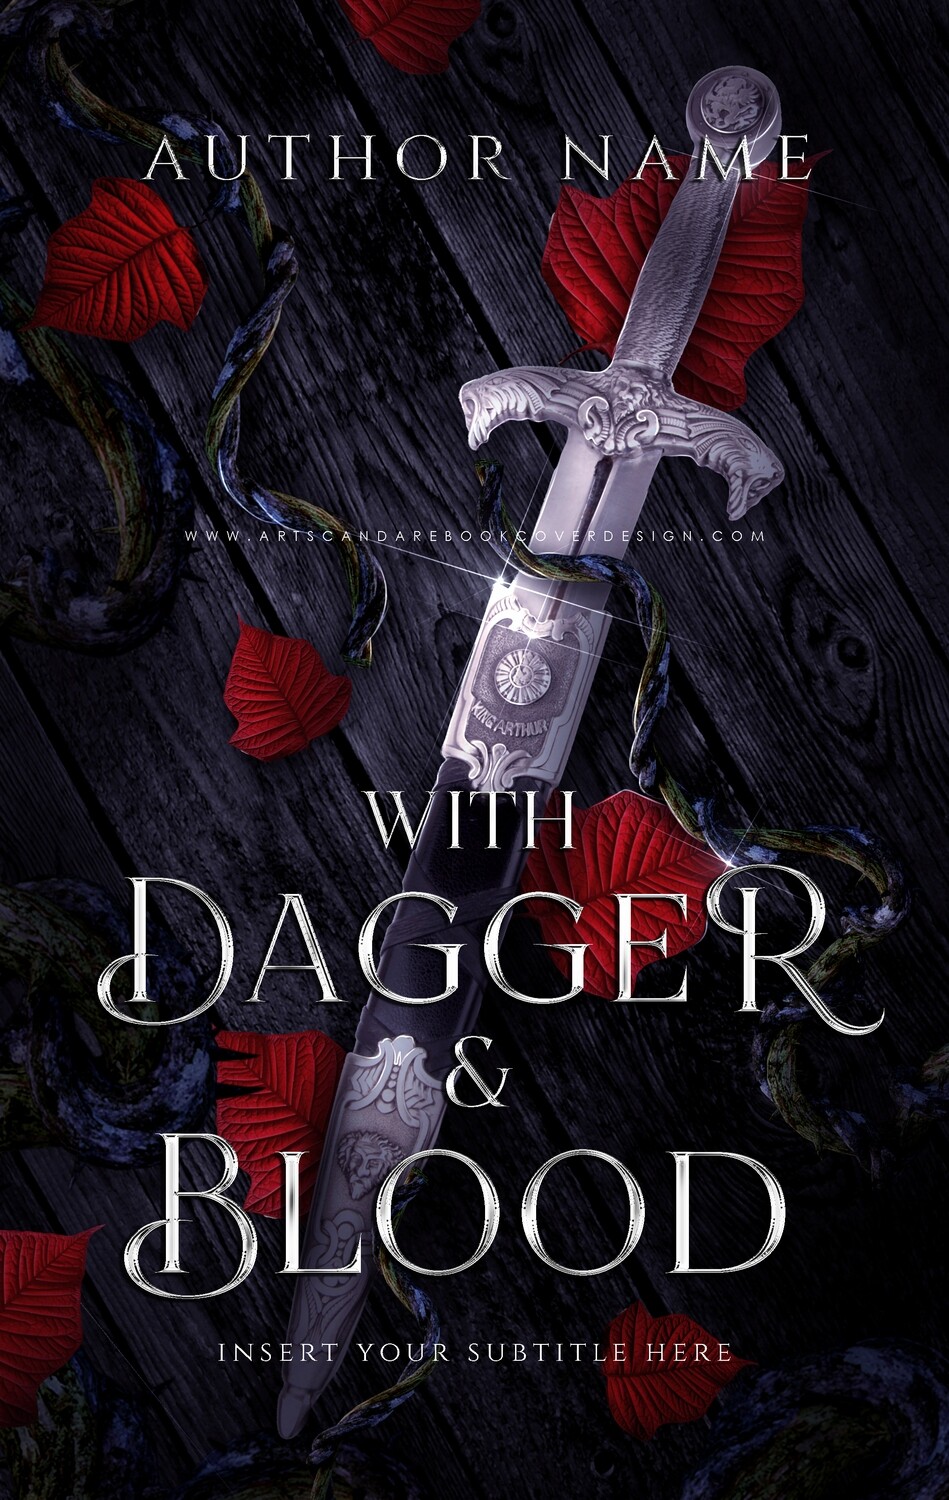 Ebook: With Dagger and Blood